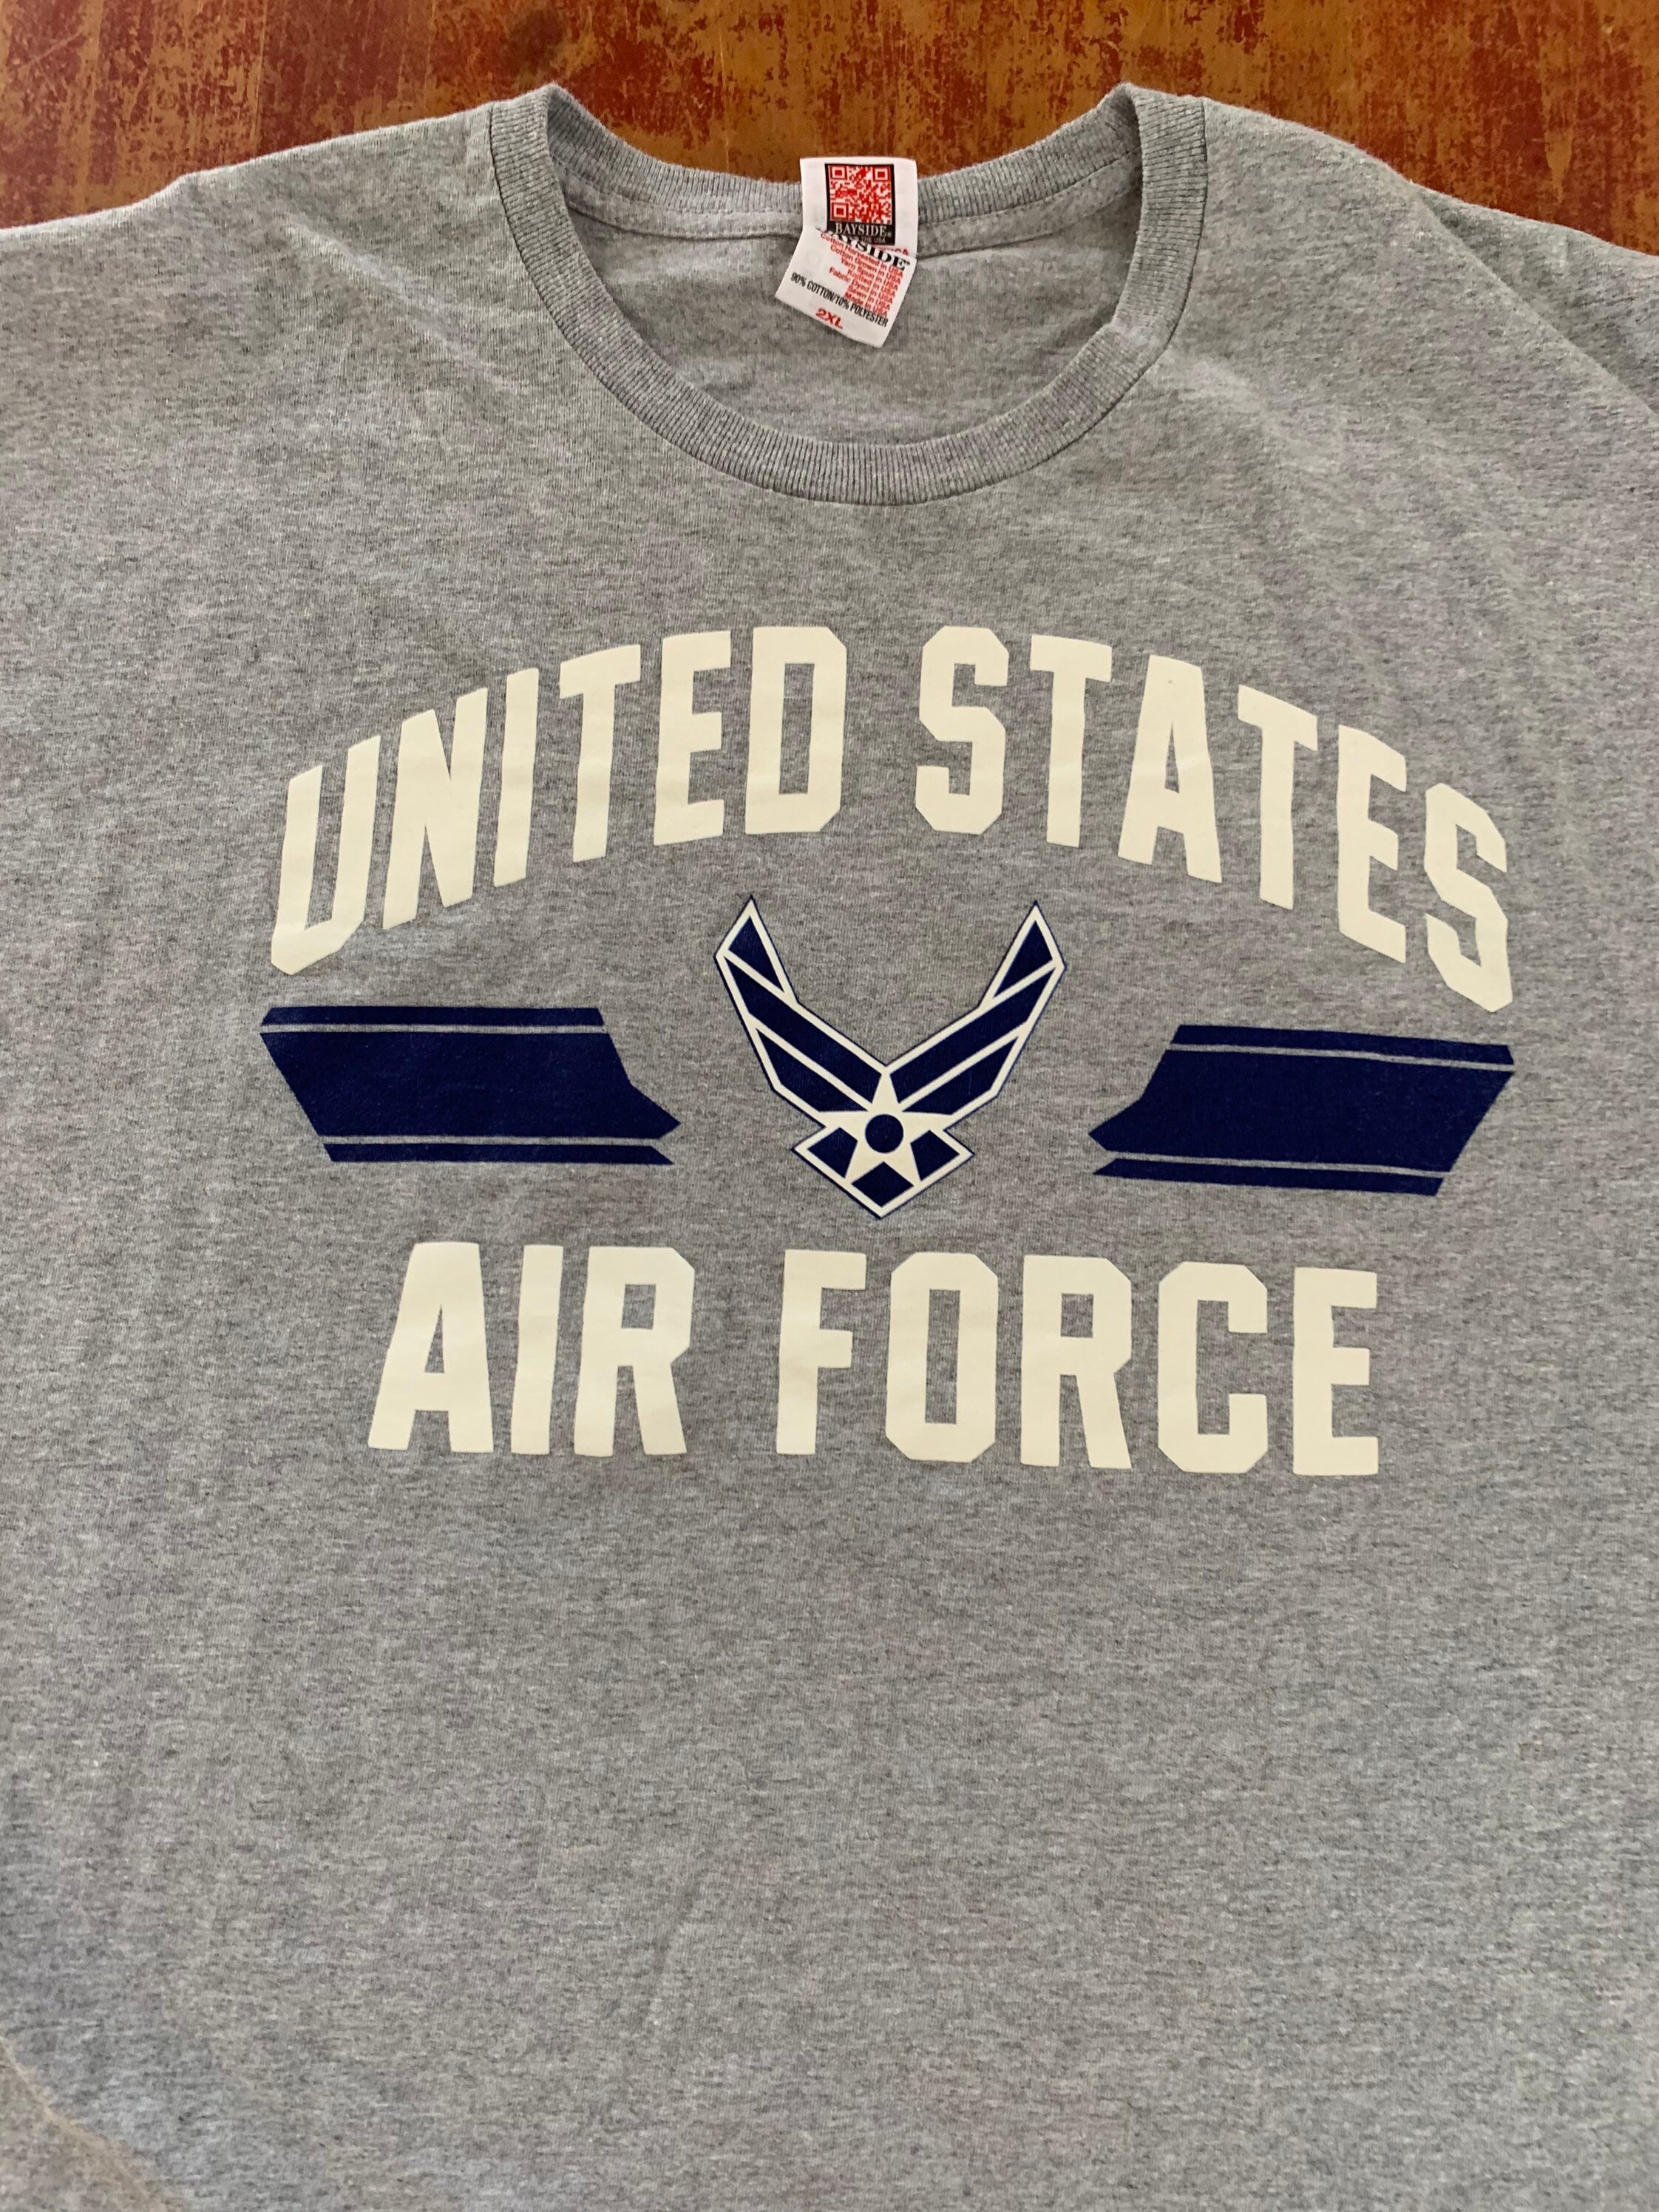 Vintage United States Air Force T Shirt Size 2XL Quality Made - Etsy UK